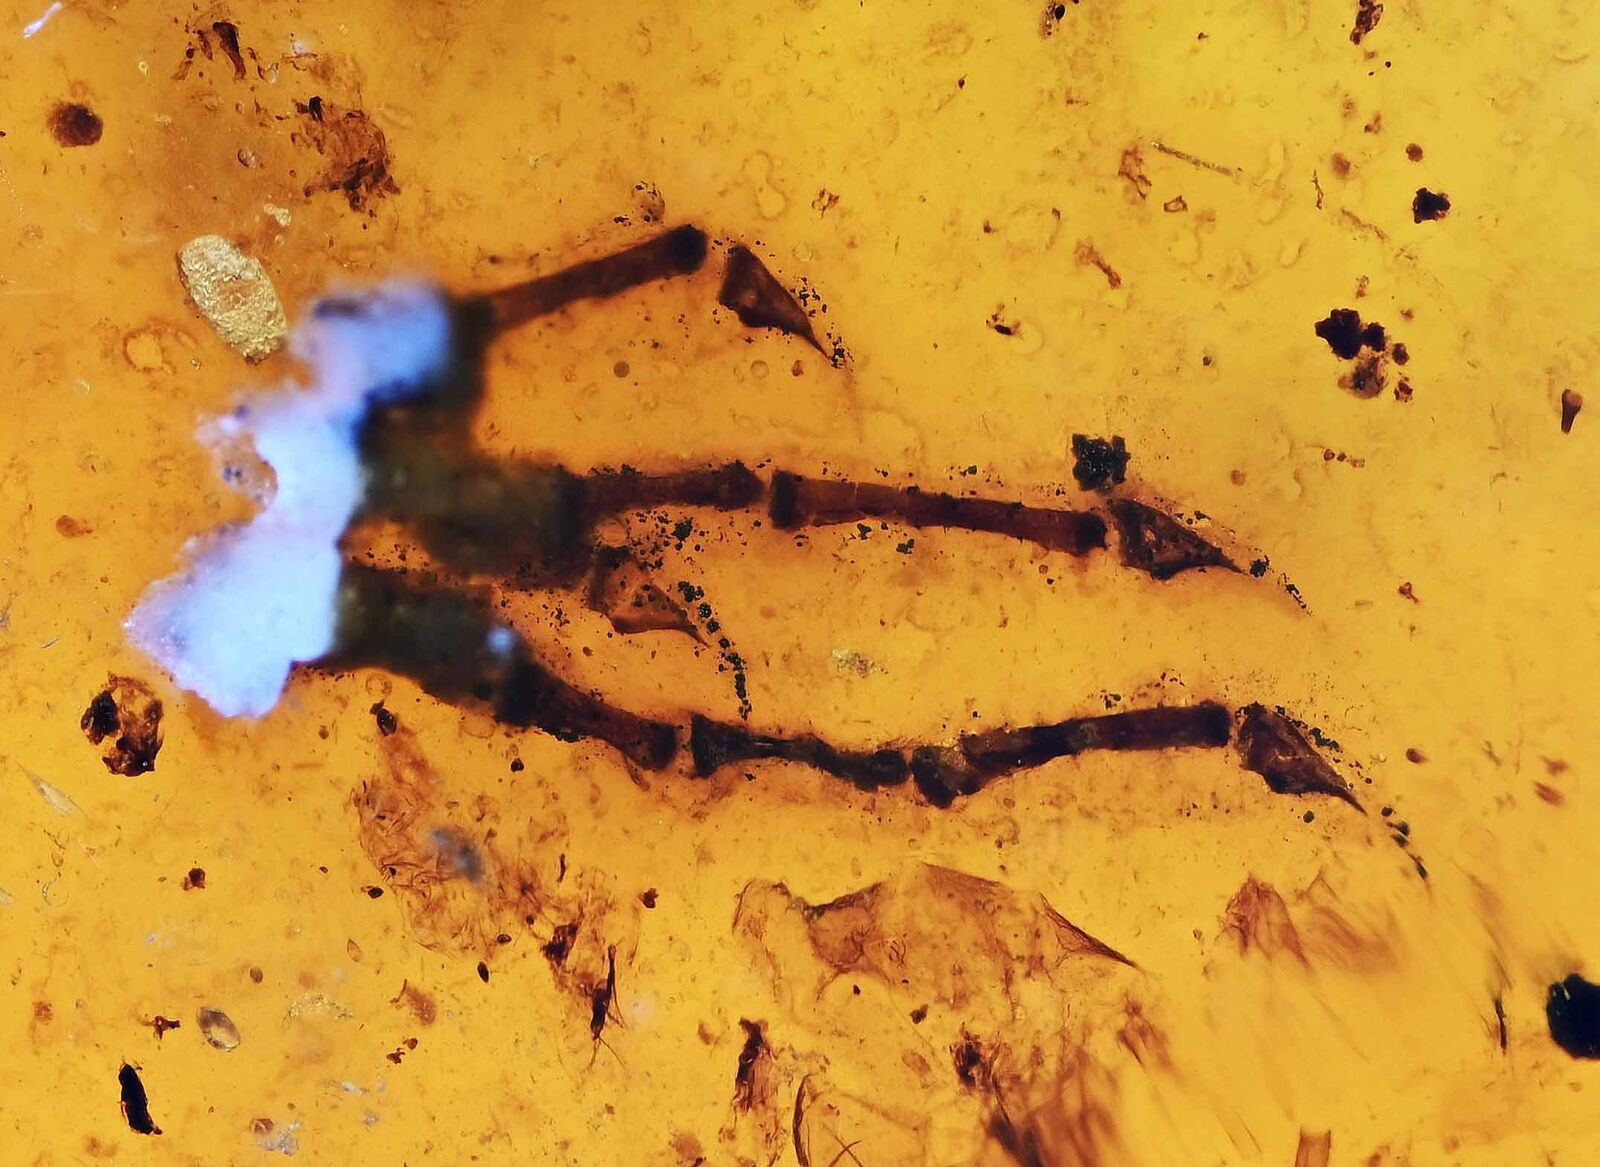 Rare Lizard Claw/Foot, Fossil Inclusion in Burmese Amber